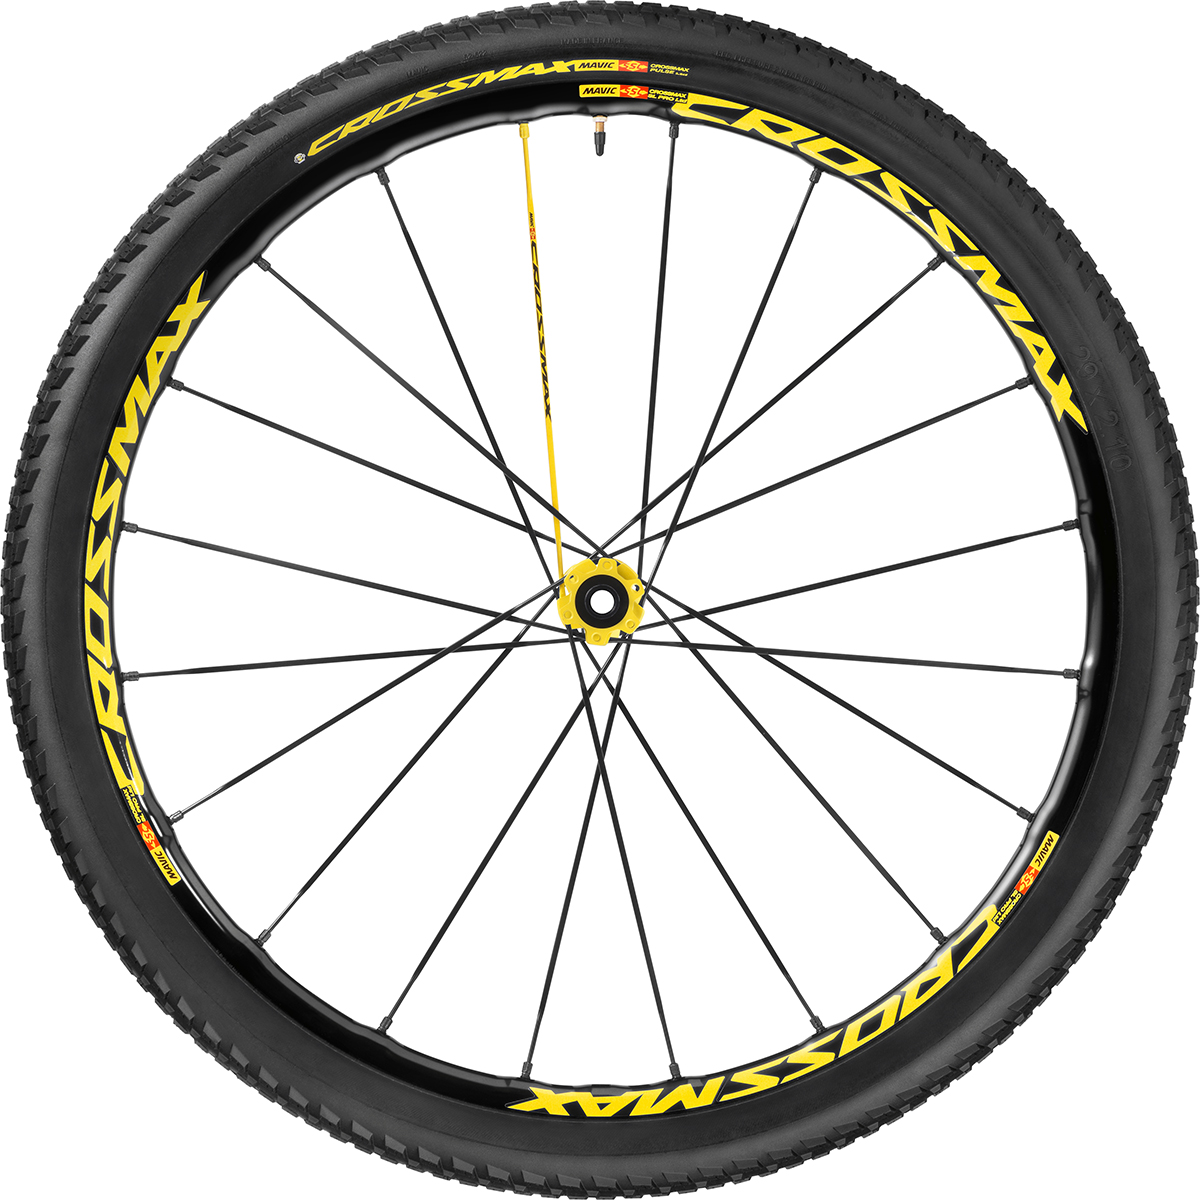 Mavic Honors 20 years of Crossmax with Pro LTD WTS, Clothes, and 